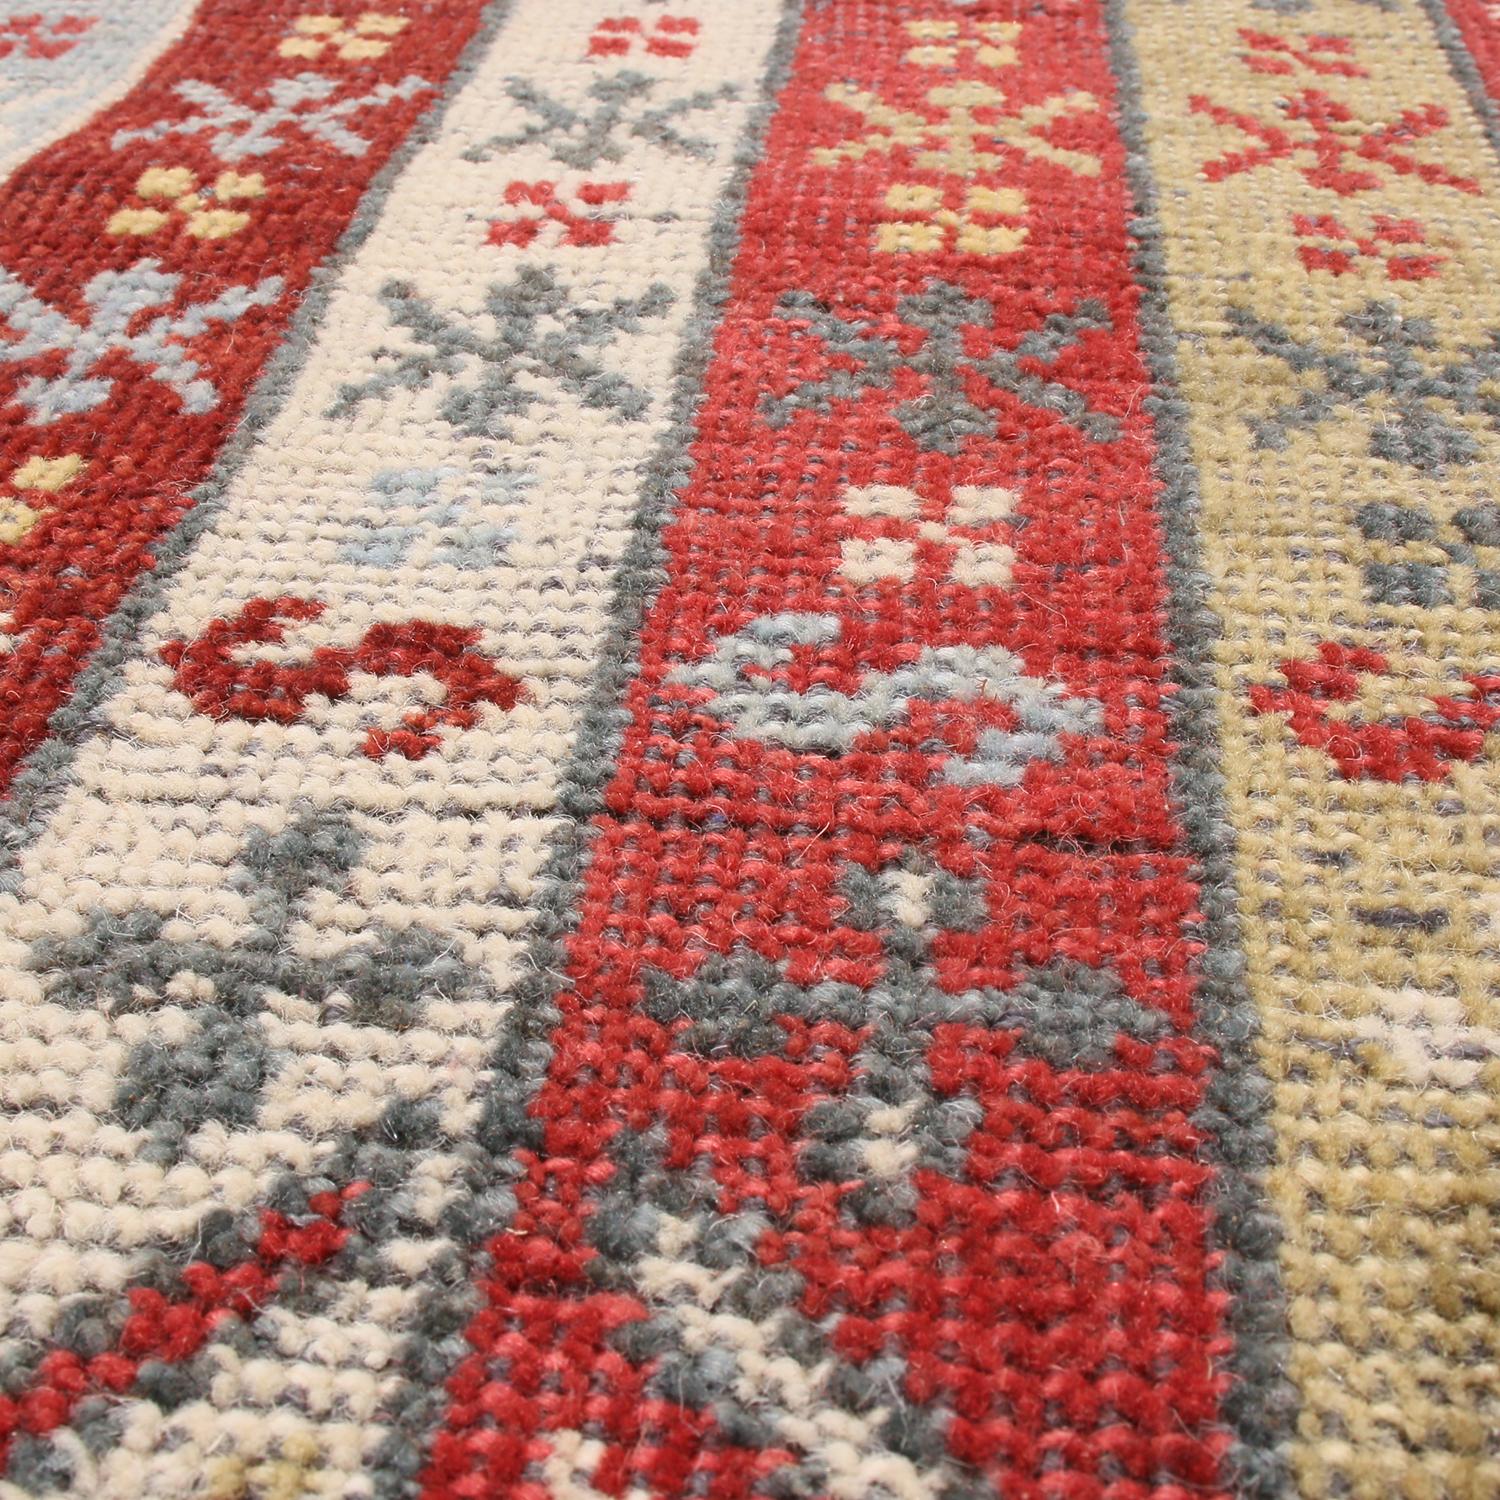 Hand-Knotted Burano Burgundy Red and Blue Wool Runner Rug with Antique Hook Motifs